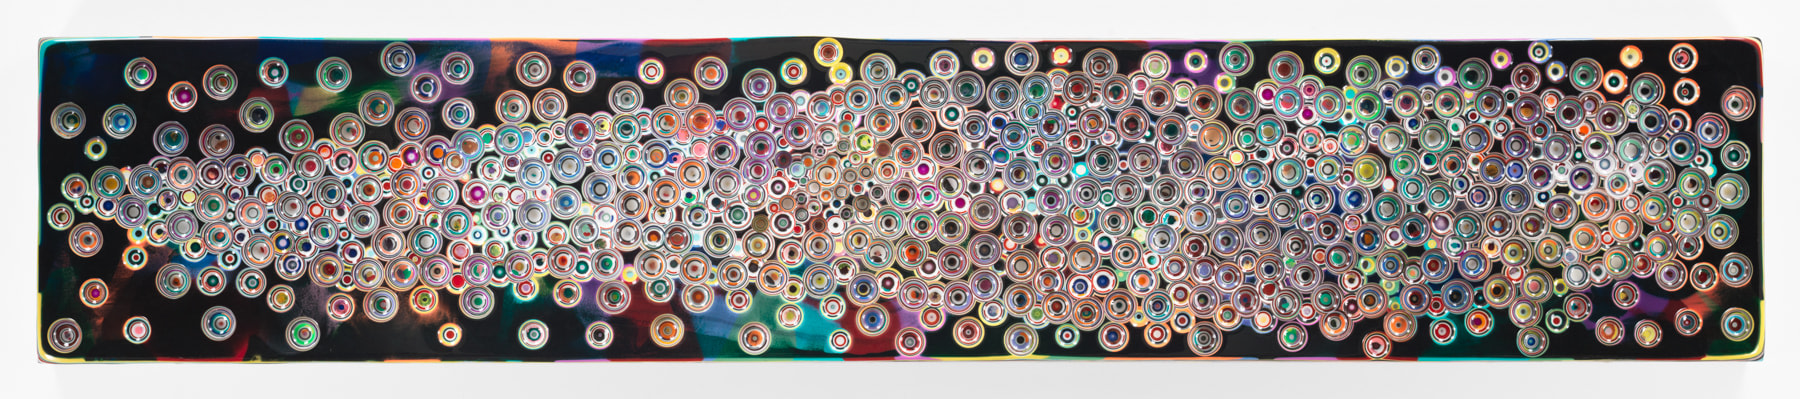 BECAUSENIGHTITISNOWANDSOON, 2016, Epoxy resin and pigments on wood, 18 x 96 inches, 45.7 x 243.8 cm, AMY#28220